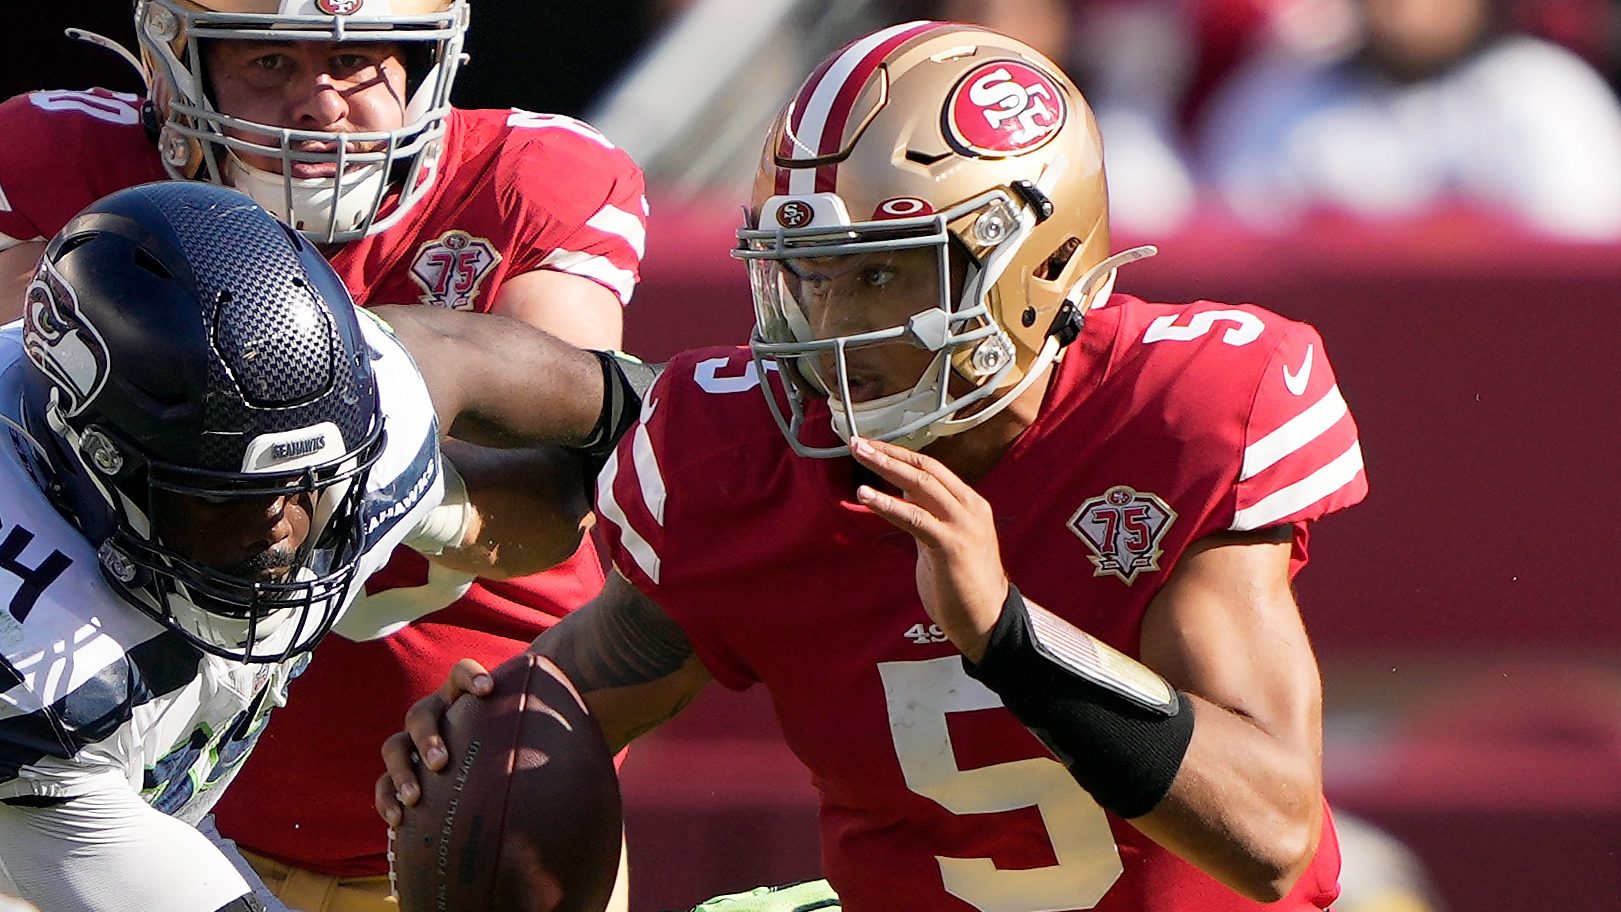 How To Watch 49ers Vs Cardinals Live Online